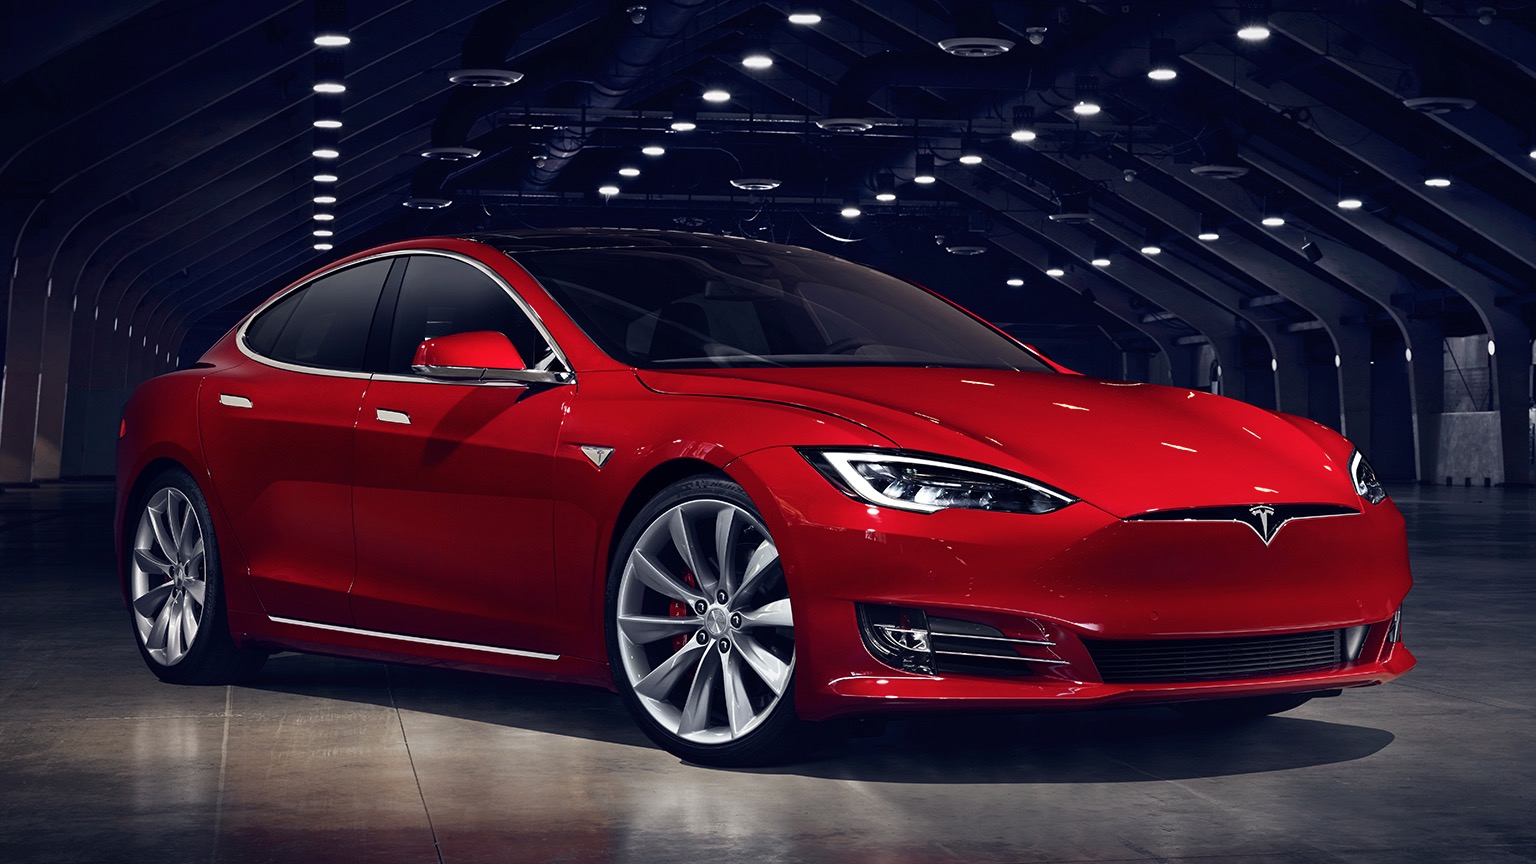 15 - The Least Reliable Cars You Can Buy - Tesla Model S